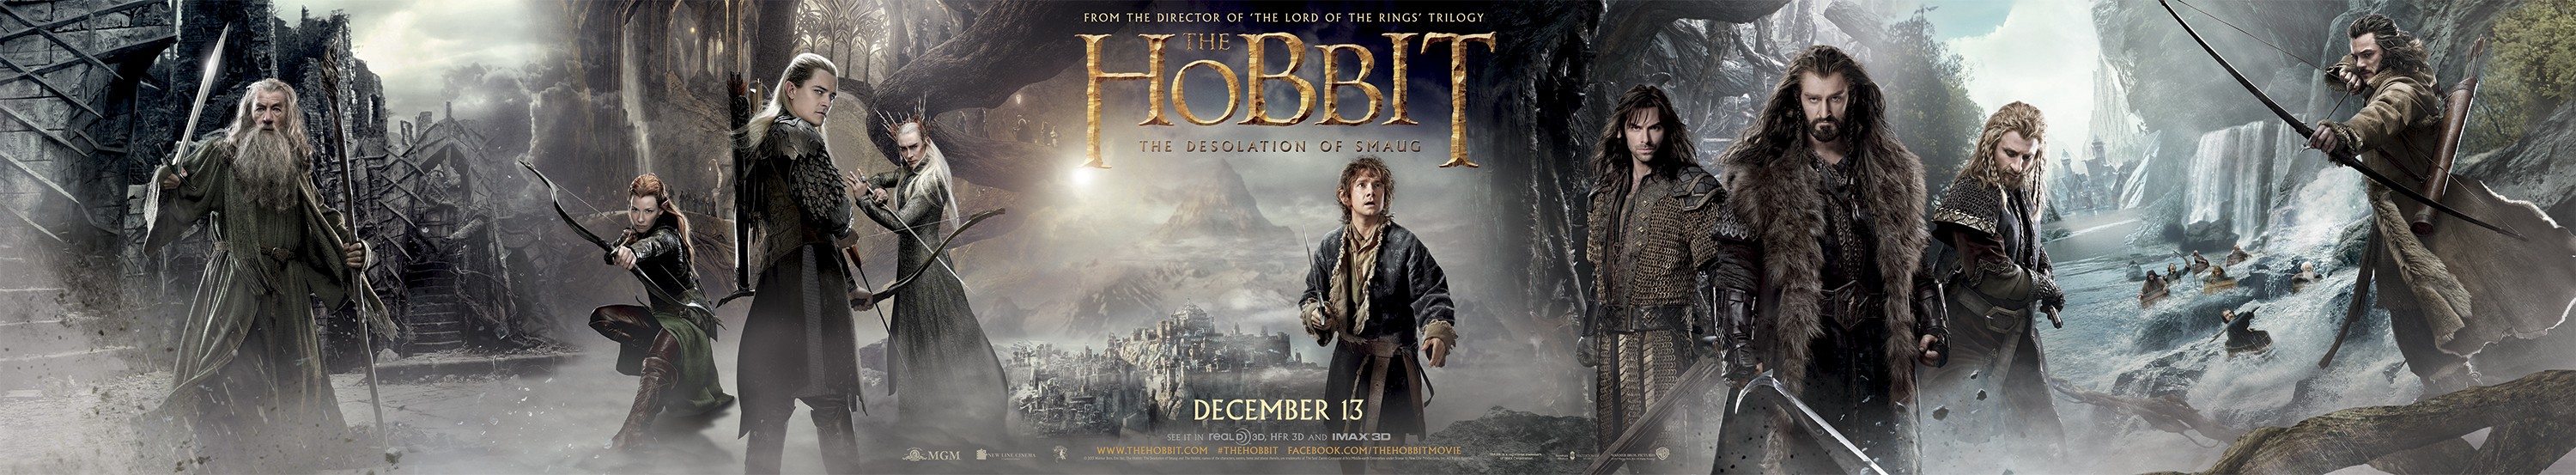 Mega Sized Movie Poster Image for The Hobbit: The Desolation of Smaug (#7 of 33)